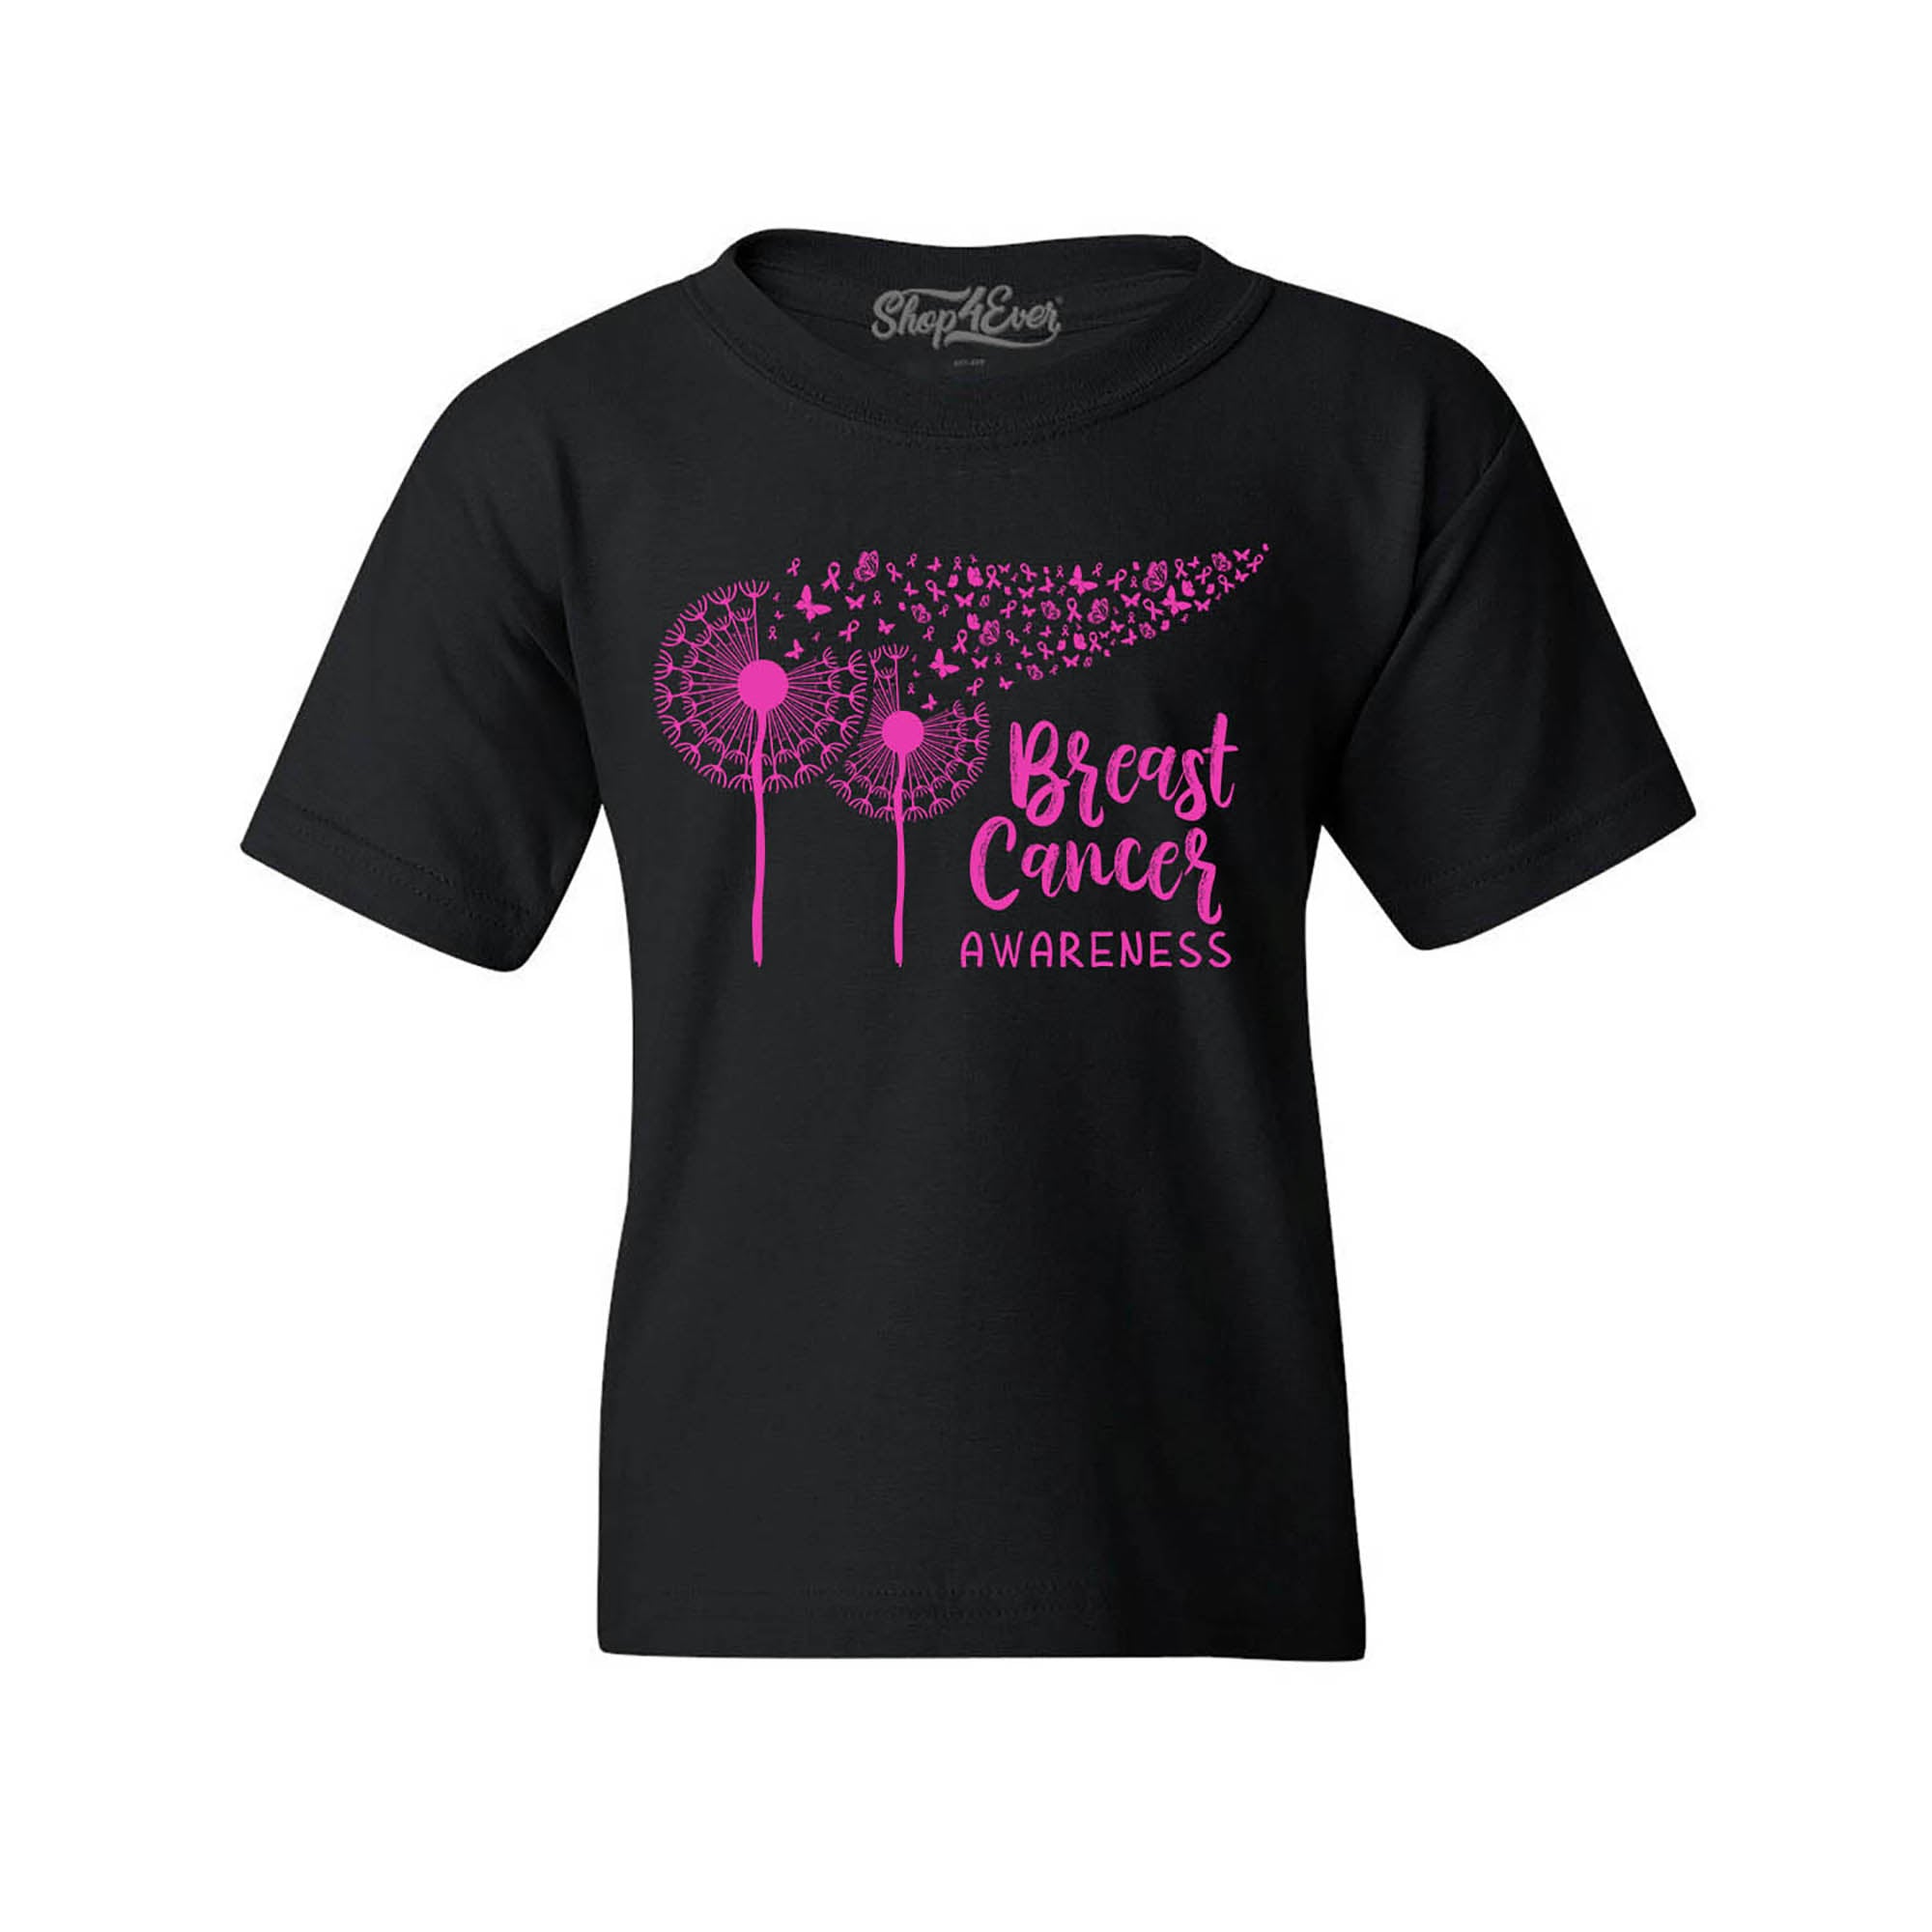 Dandelion Breast Cancer Awareness Youth's T-Shirt